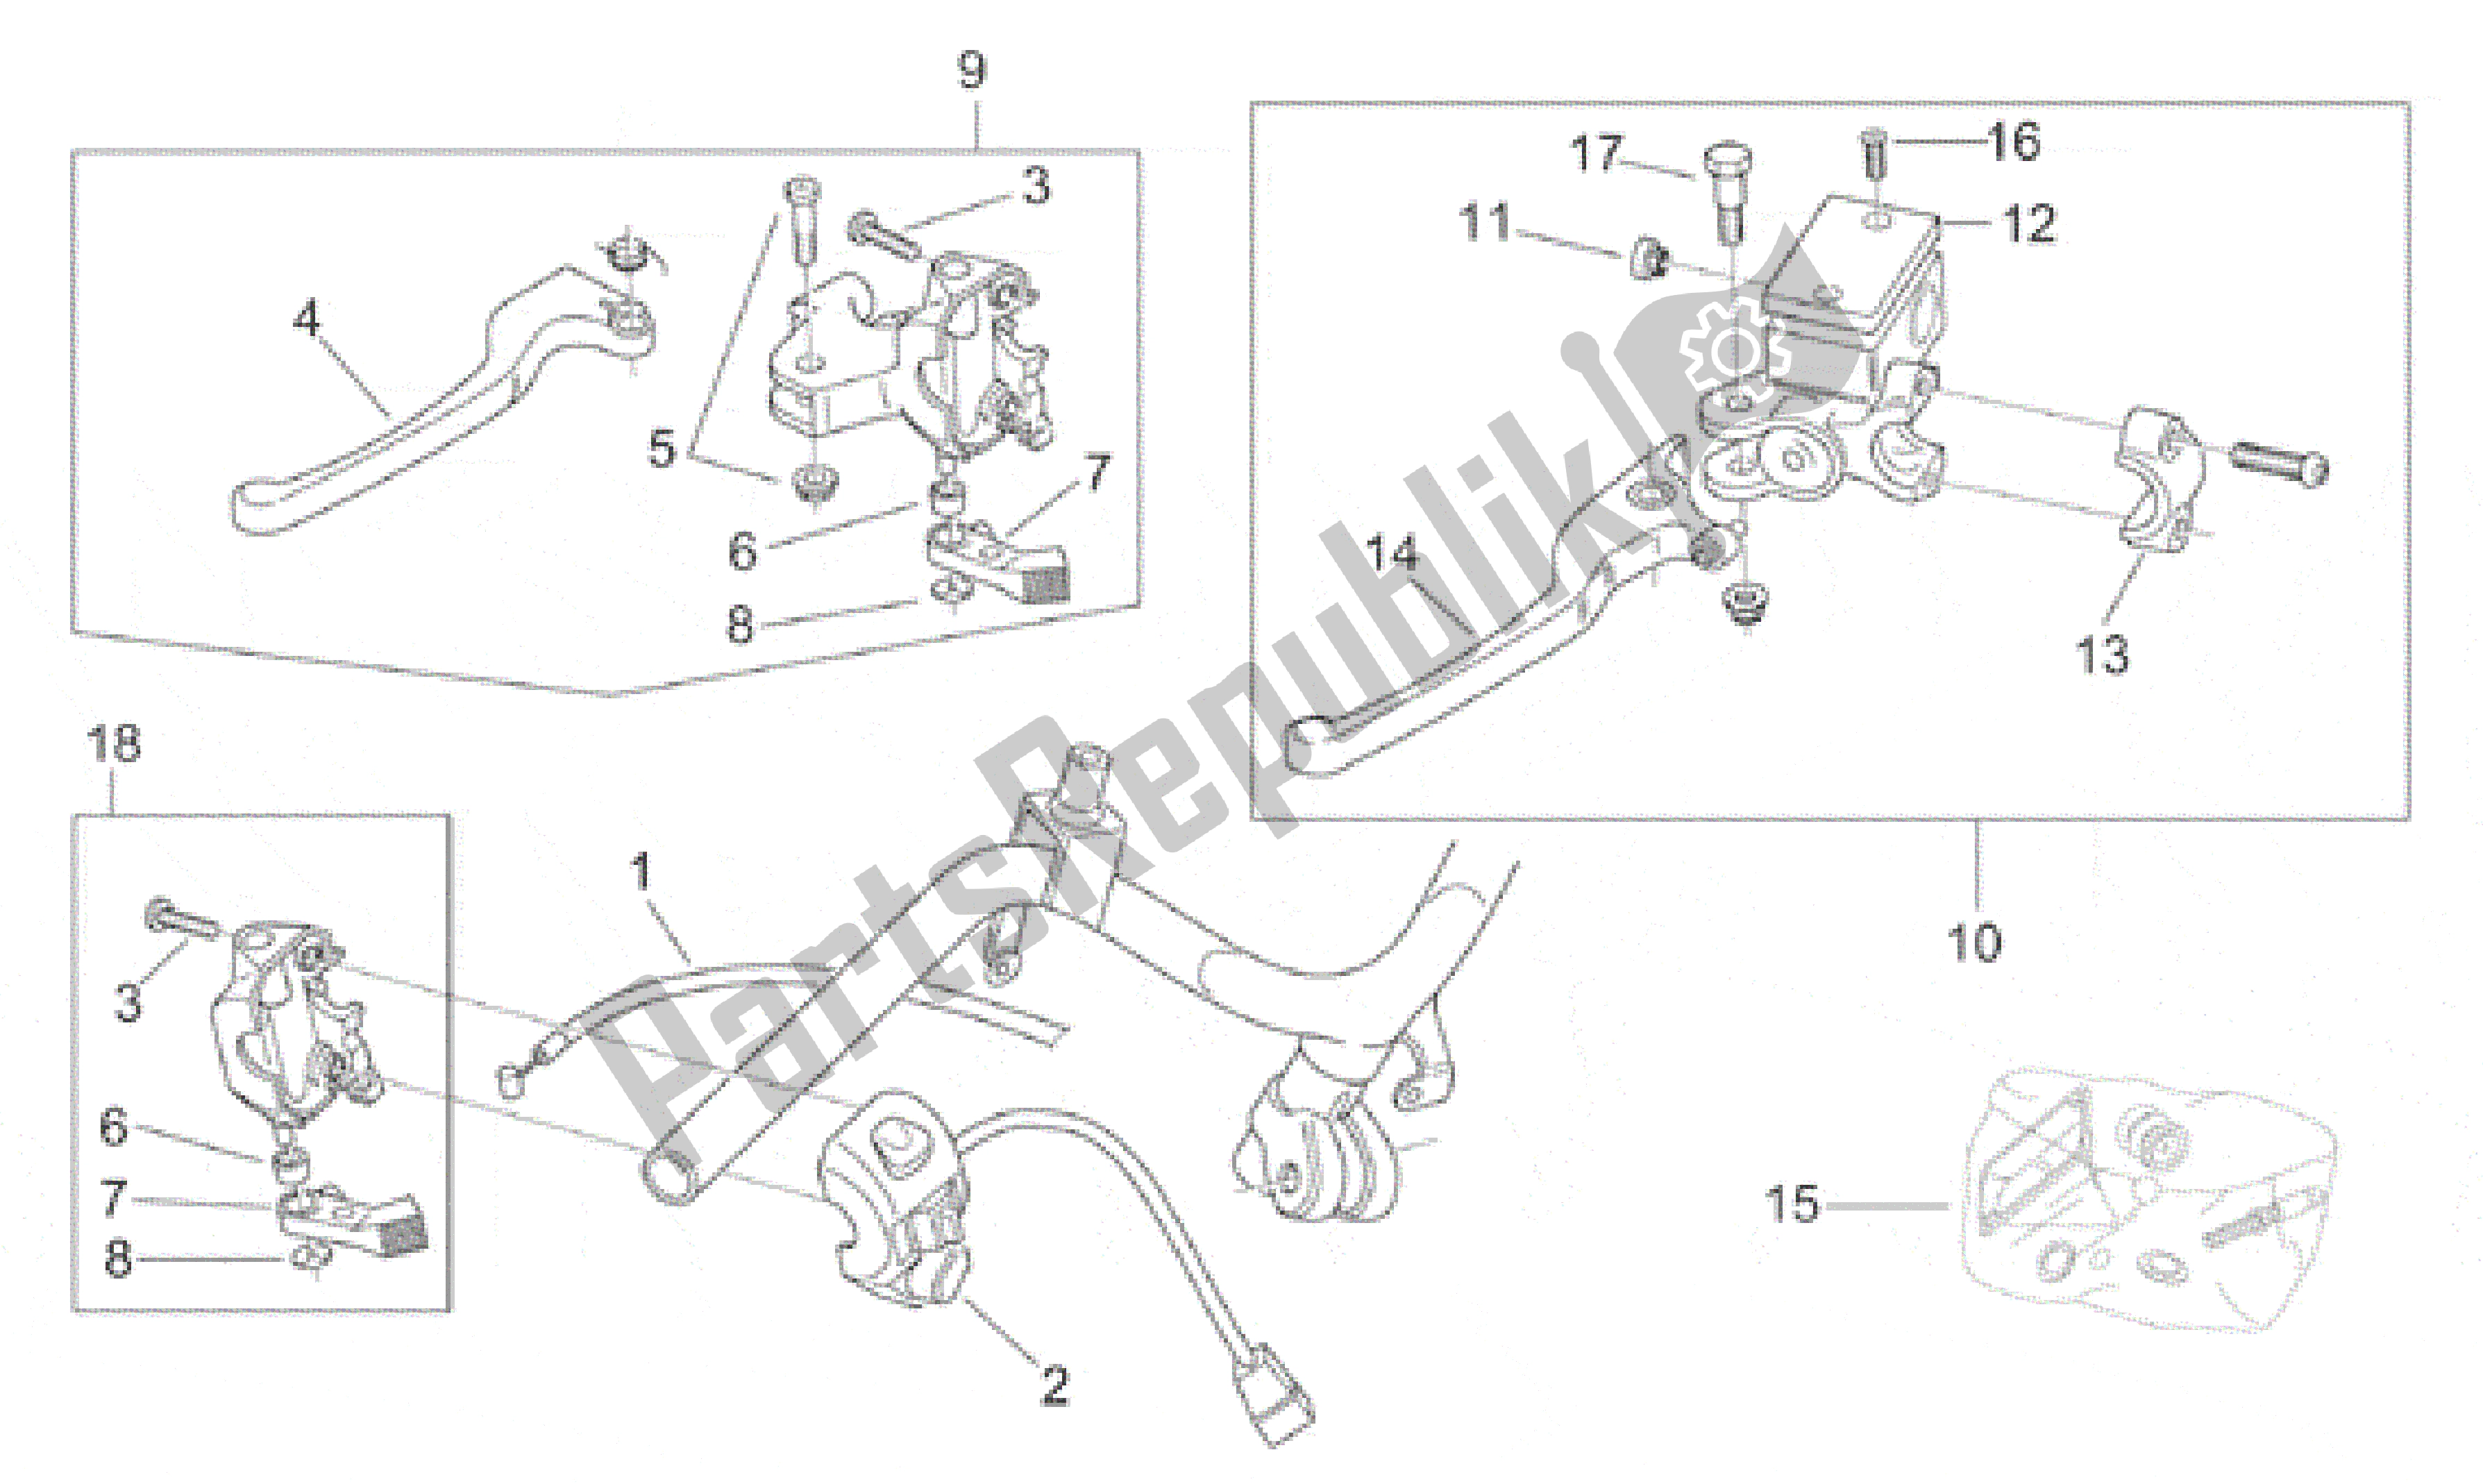 All parts for the Lh Controls of the Aprilia Scarabeo 50 1998